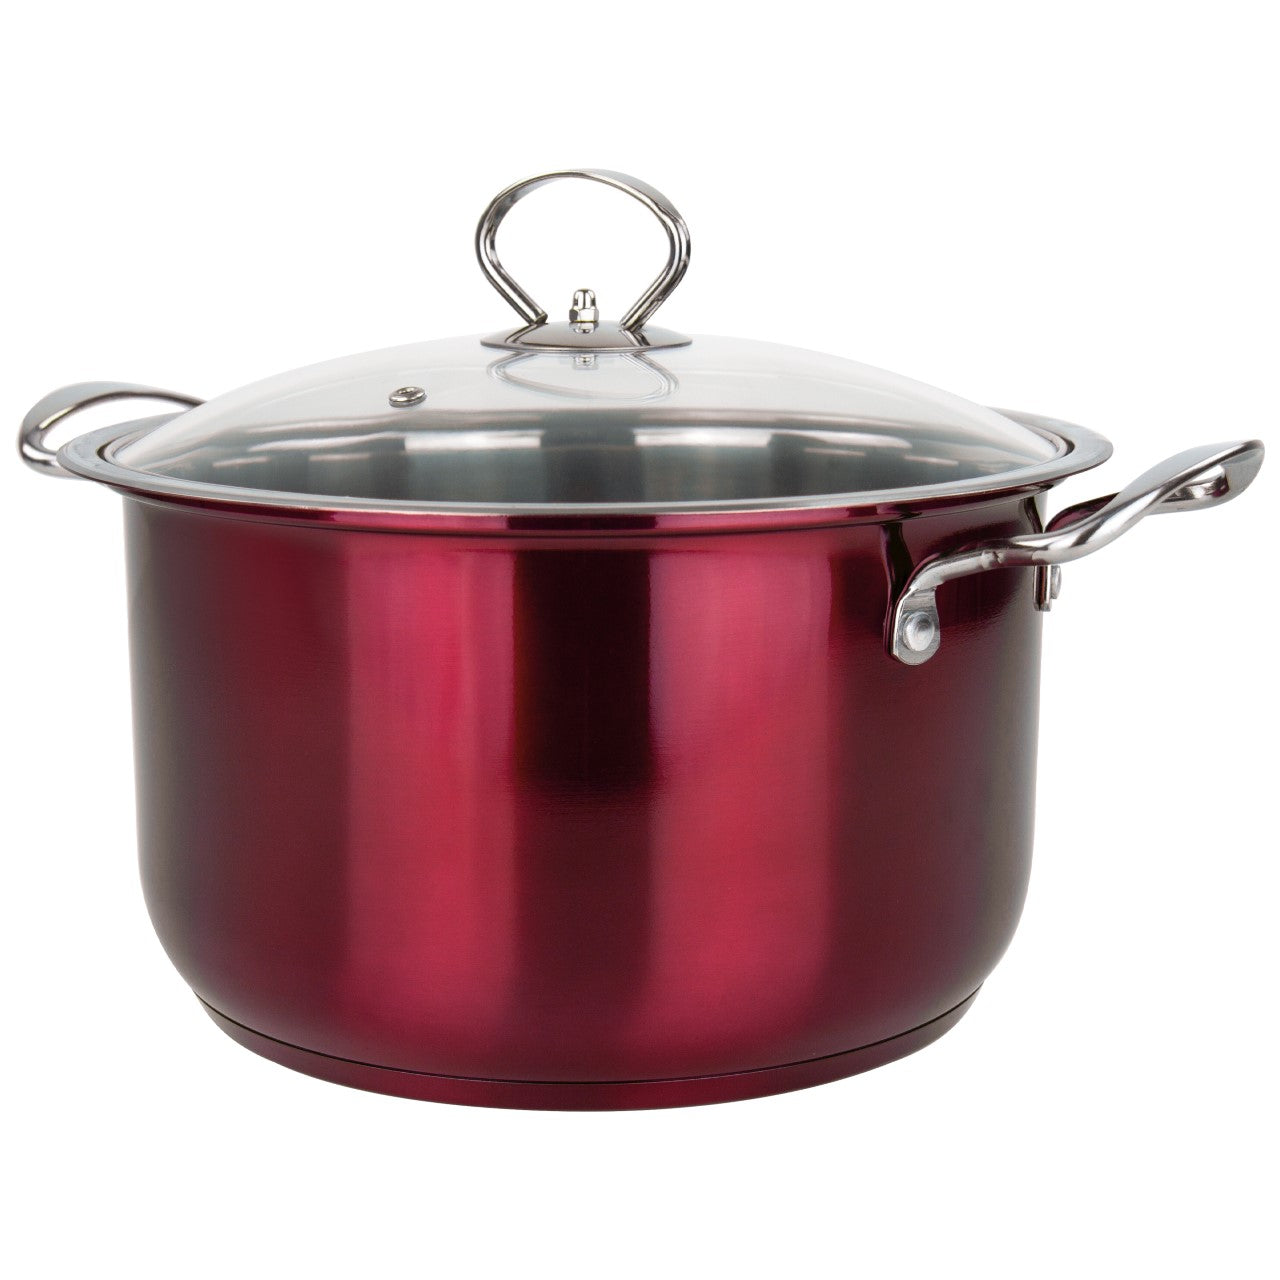 SQ Pro Stainless Steel Stockpot Set of 3 Gems Ruby 10 / 12.30 / 14.60 Litre 9576 / 2625 (Big Parcel Rate)